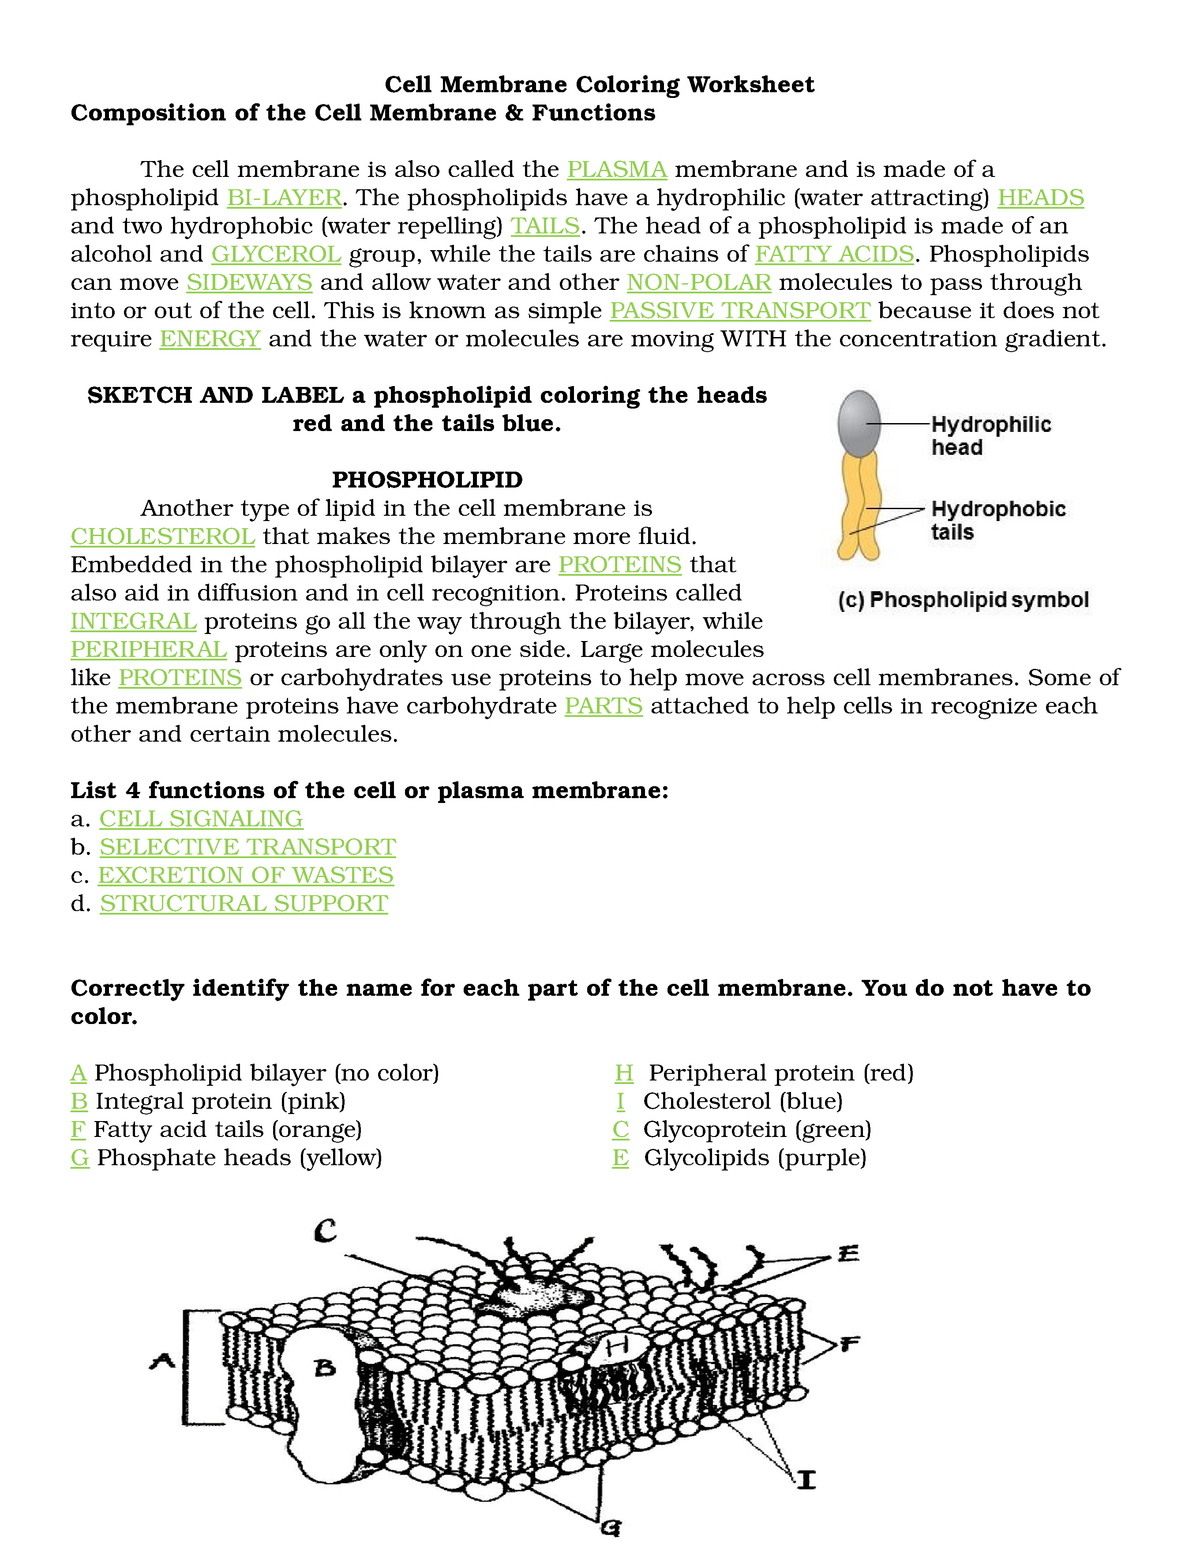 Cell Membrane Coloring Worksheet - BP 22 - Molecular Biology With Regard To Cell Membrane Coloring Worksheet Answers